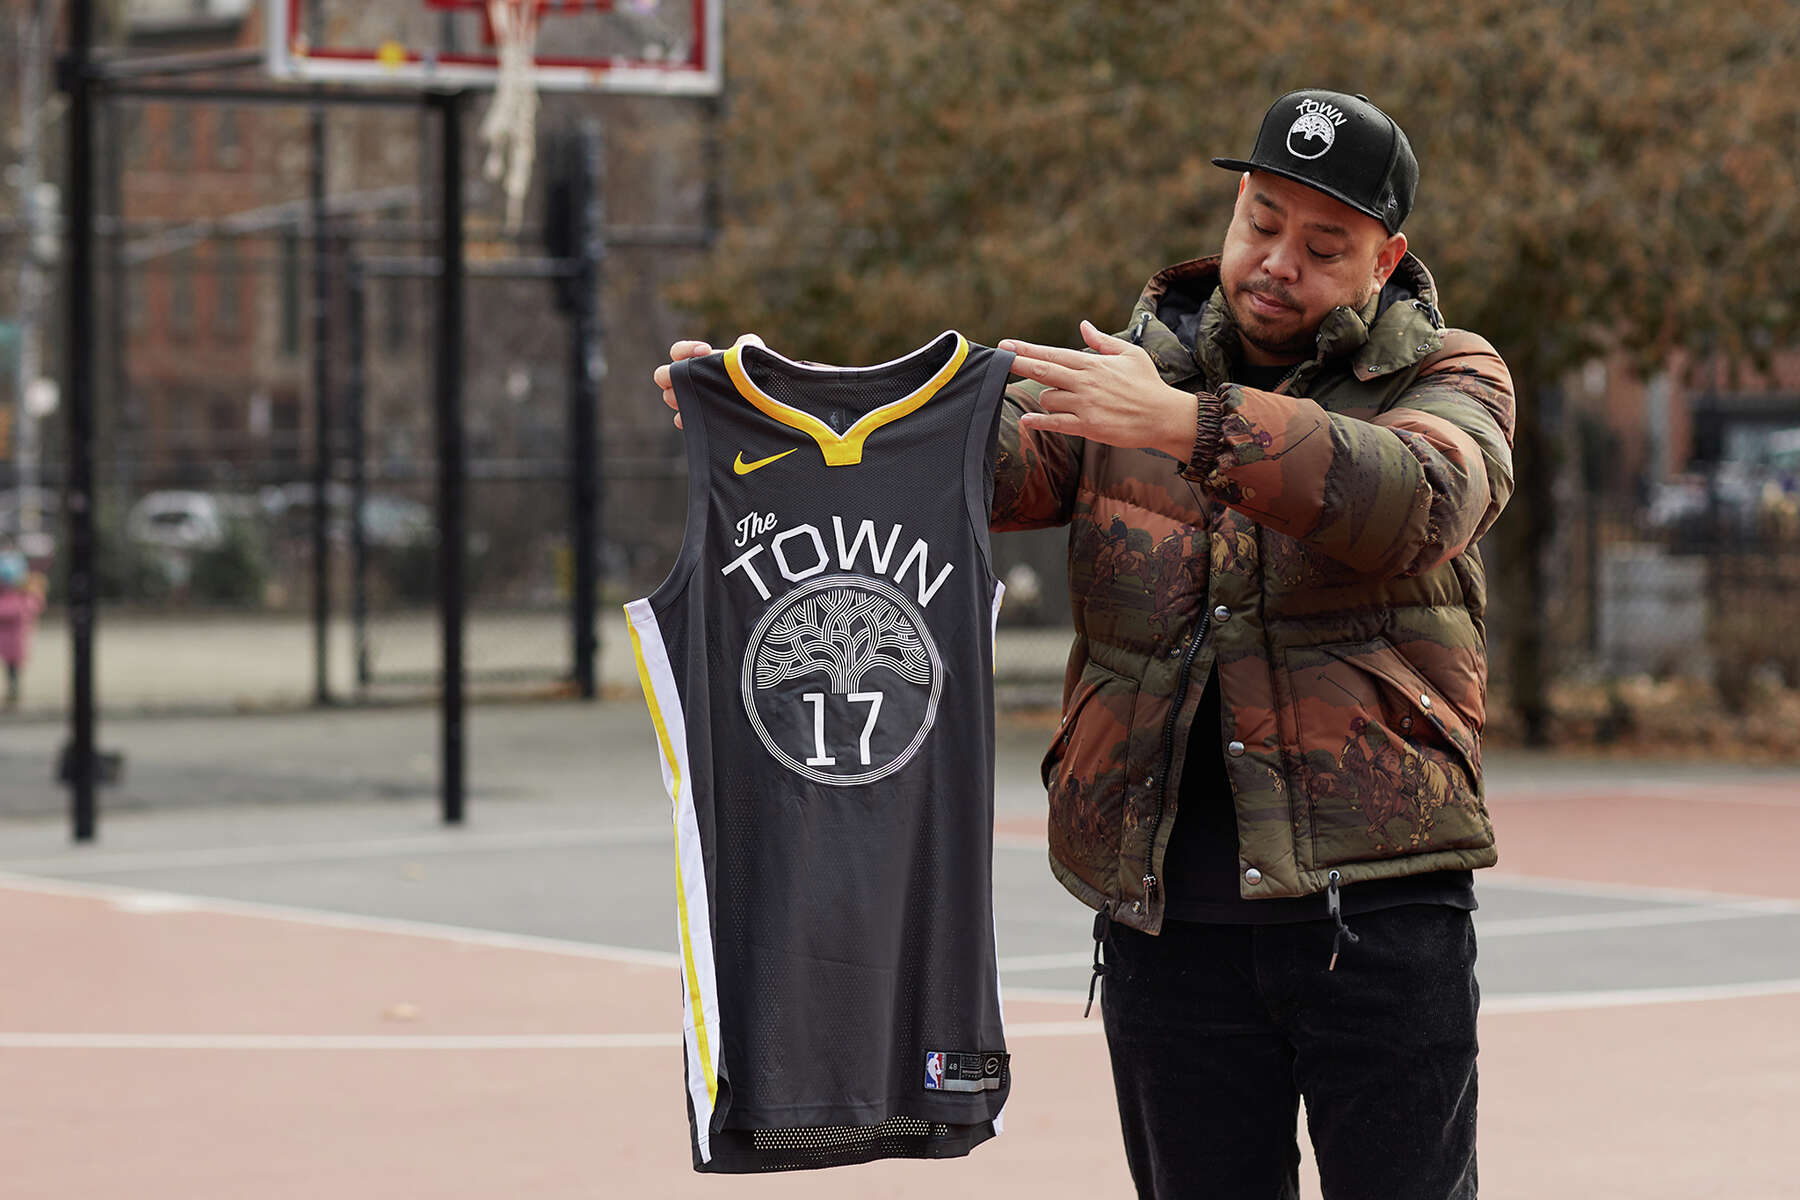 He designed Warriors 'The Town' apparel. He says 'Oakland Forever